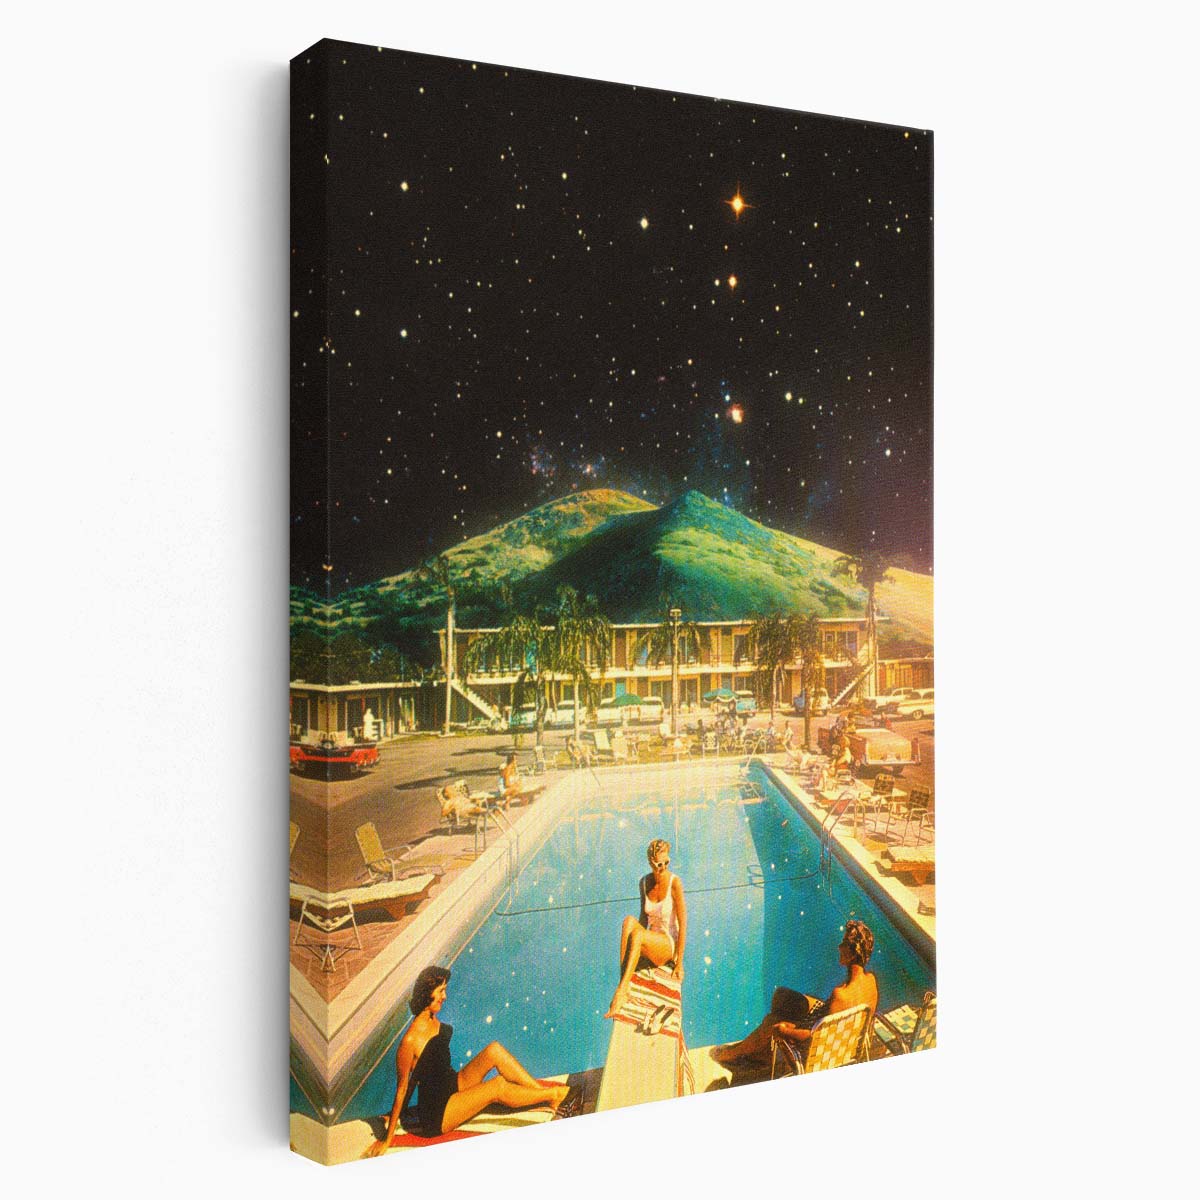 Retro Futuristic Space Pool Collage Illustration by Taudalpoi by Luxuriance Designs, made in USA